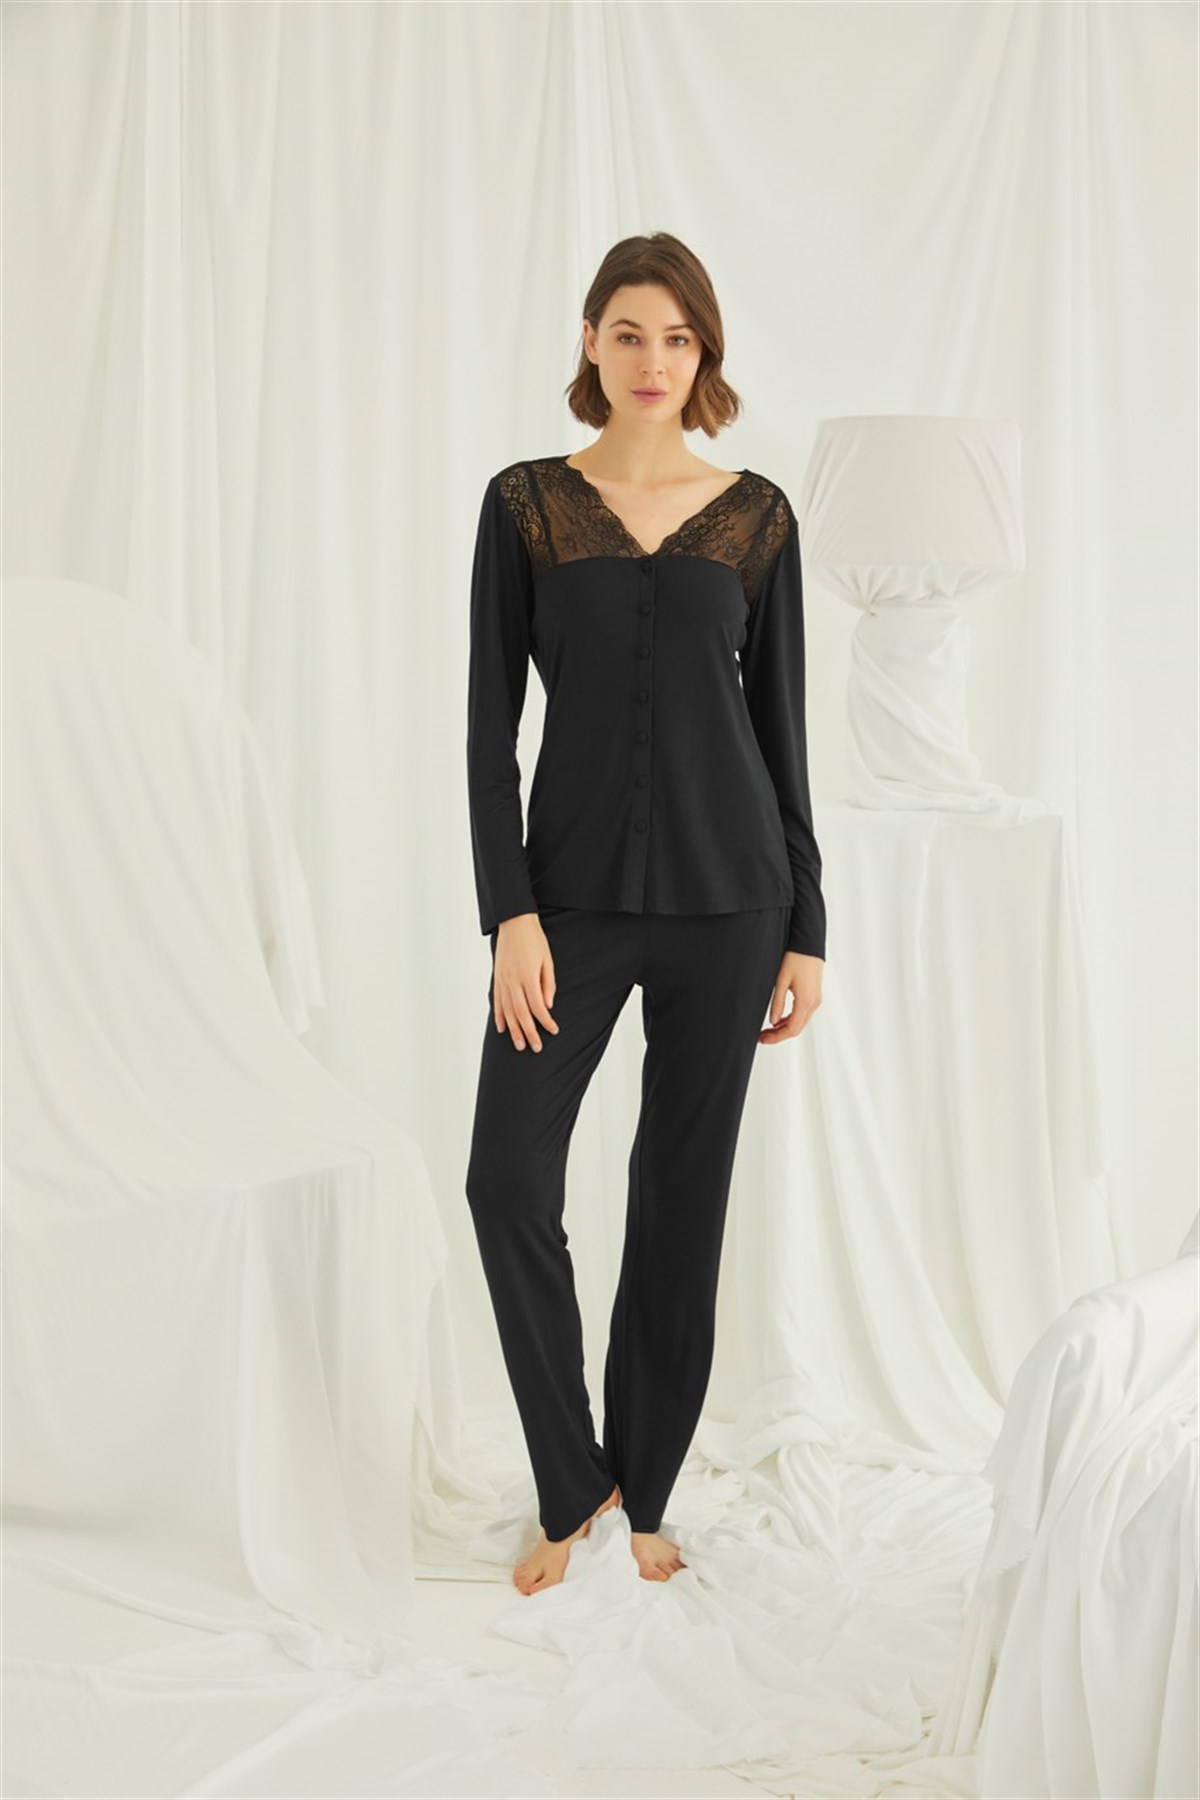 Monamise 18426 Black Lace Detailed Shoulders Front Buttoned Maternity Pajama